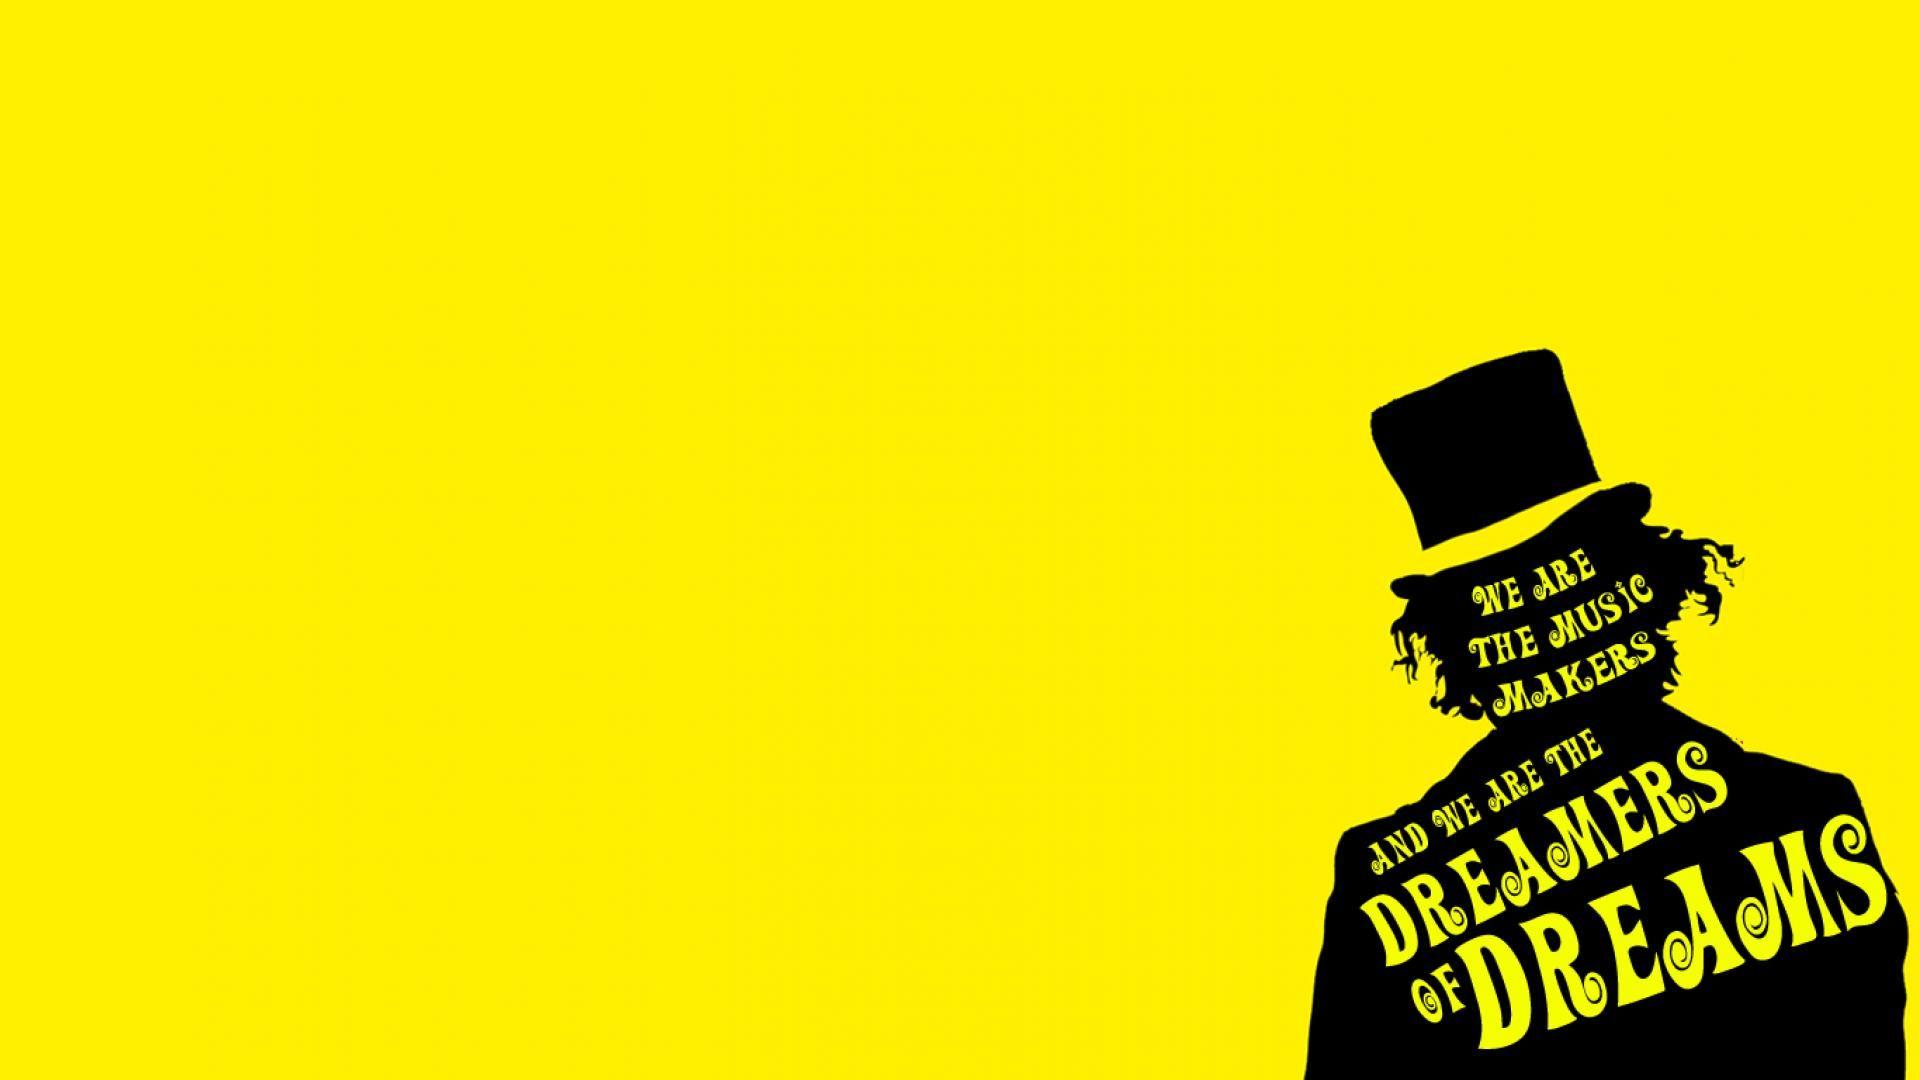 willy wonka dreams hats minimalistic quotes yellow background #bVlP